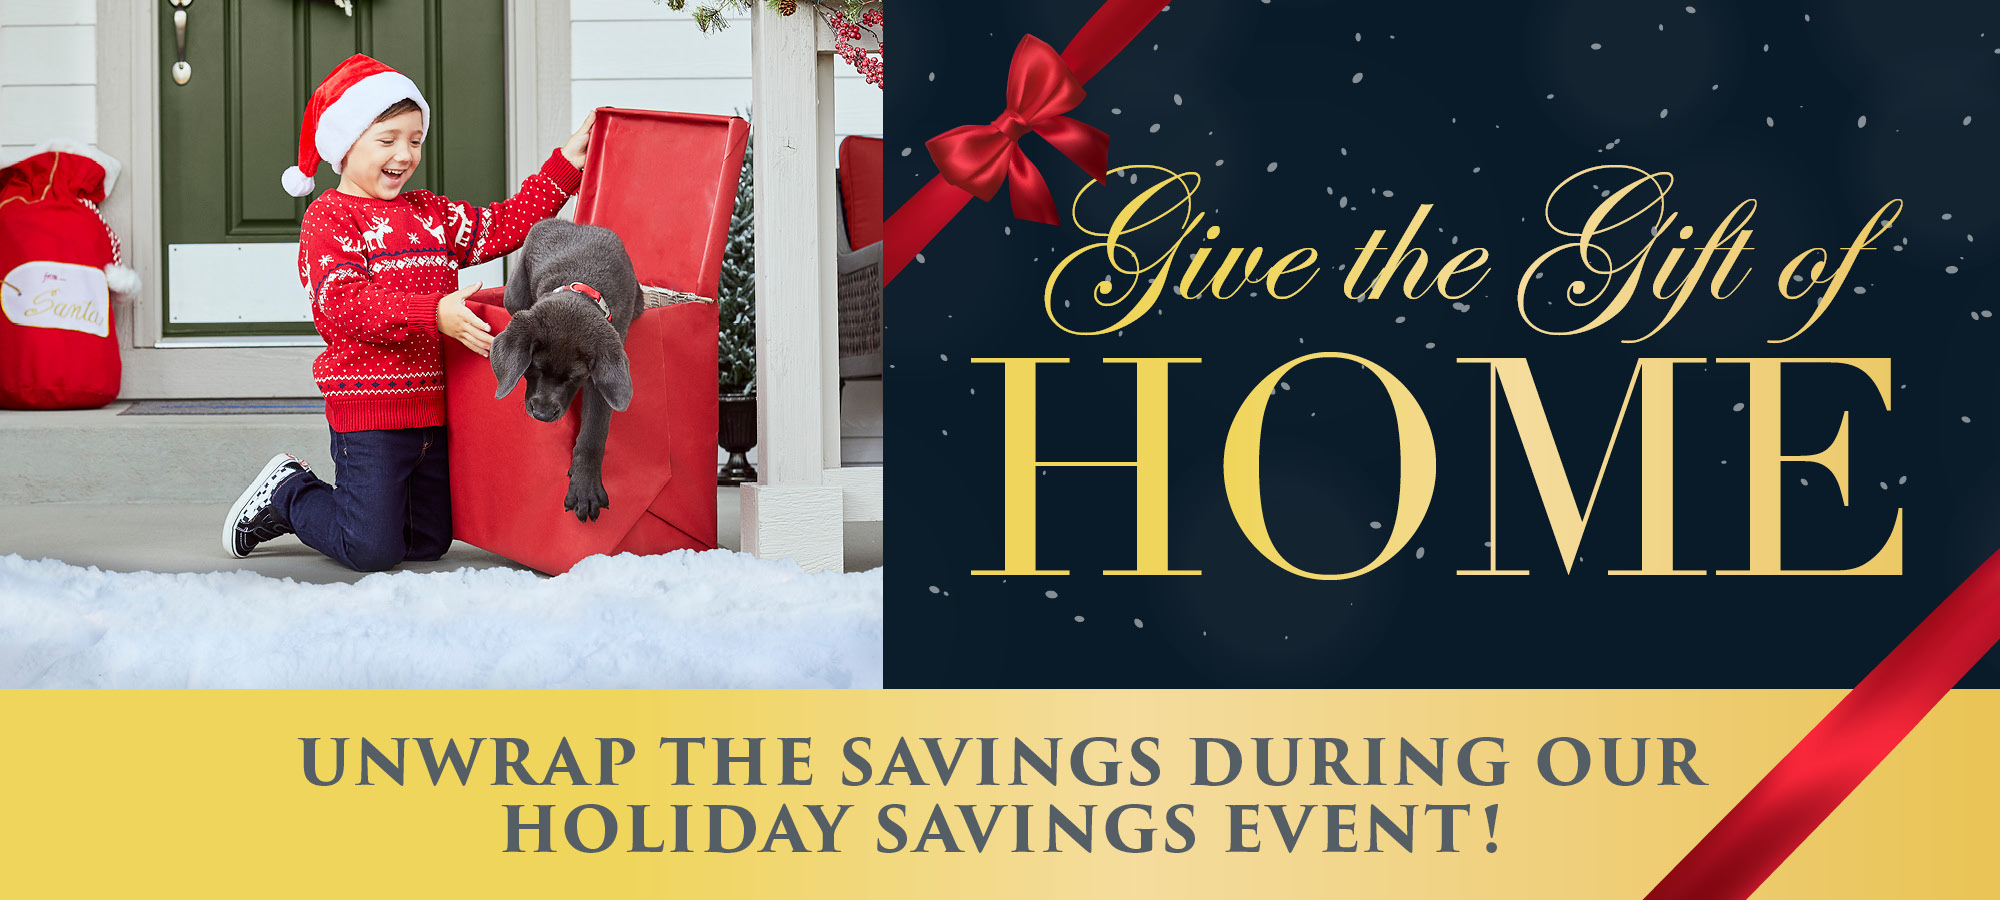 Give the Gift of Home in Orlando